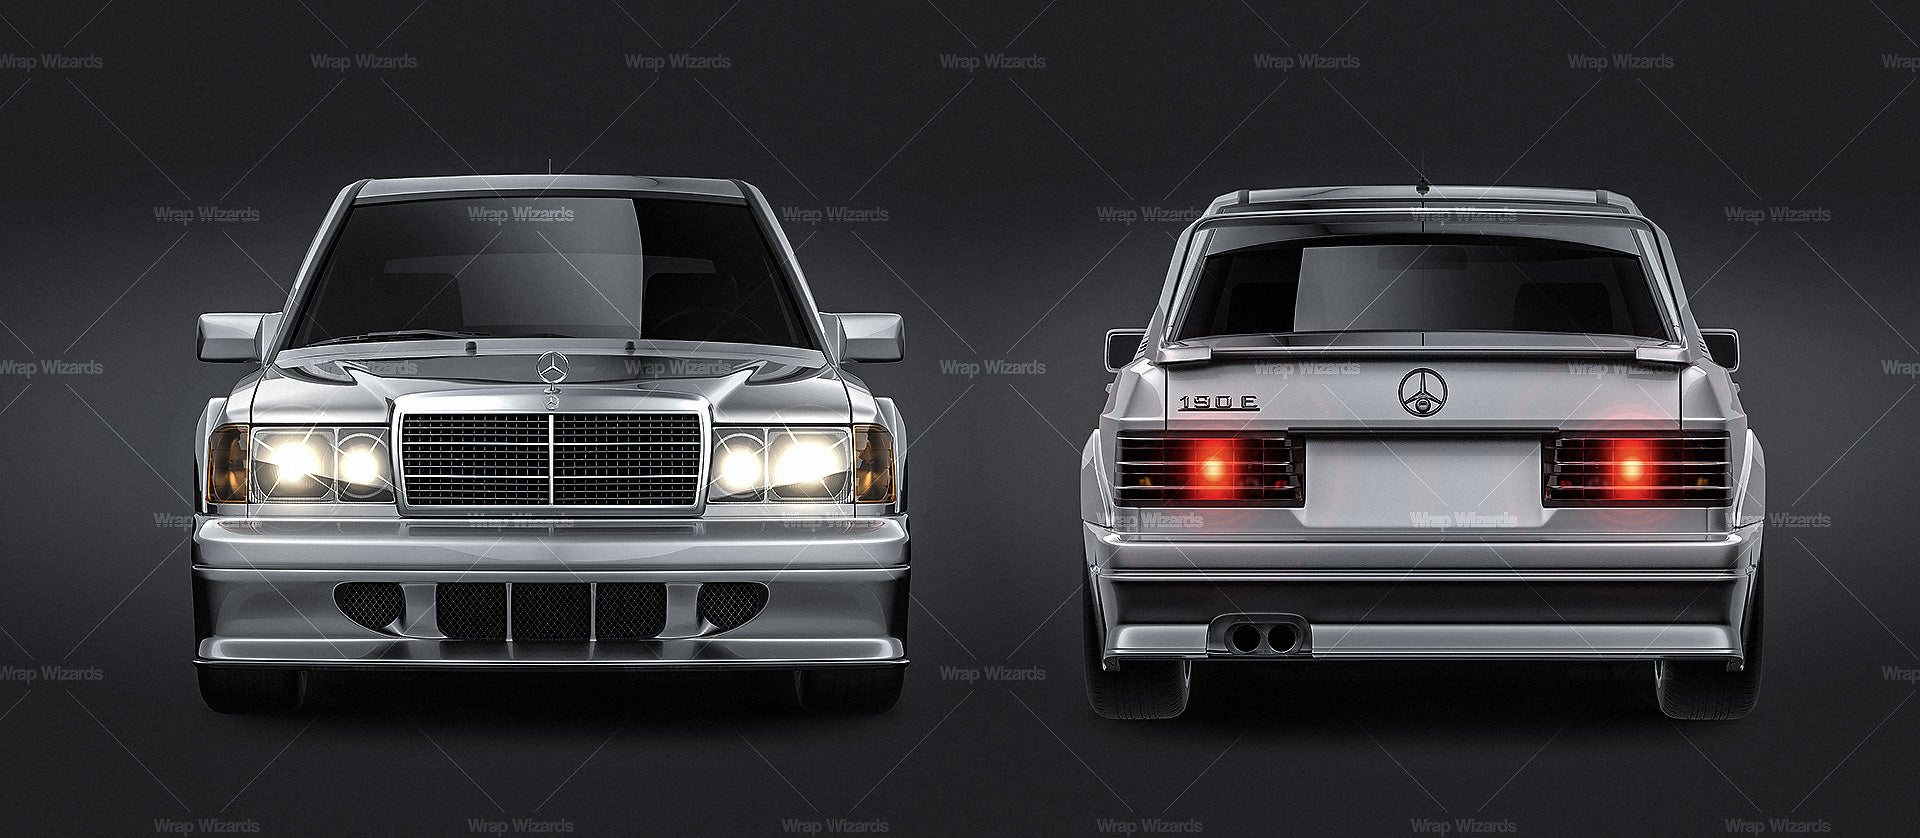 Mercedes-Benz 190E W201 Evolution II 1990 glossy finish - all sides Car Mockup Template.psd